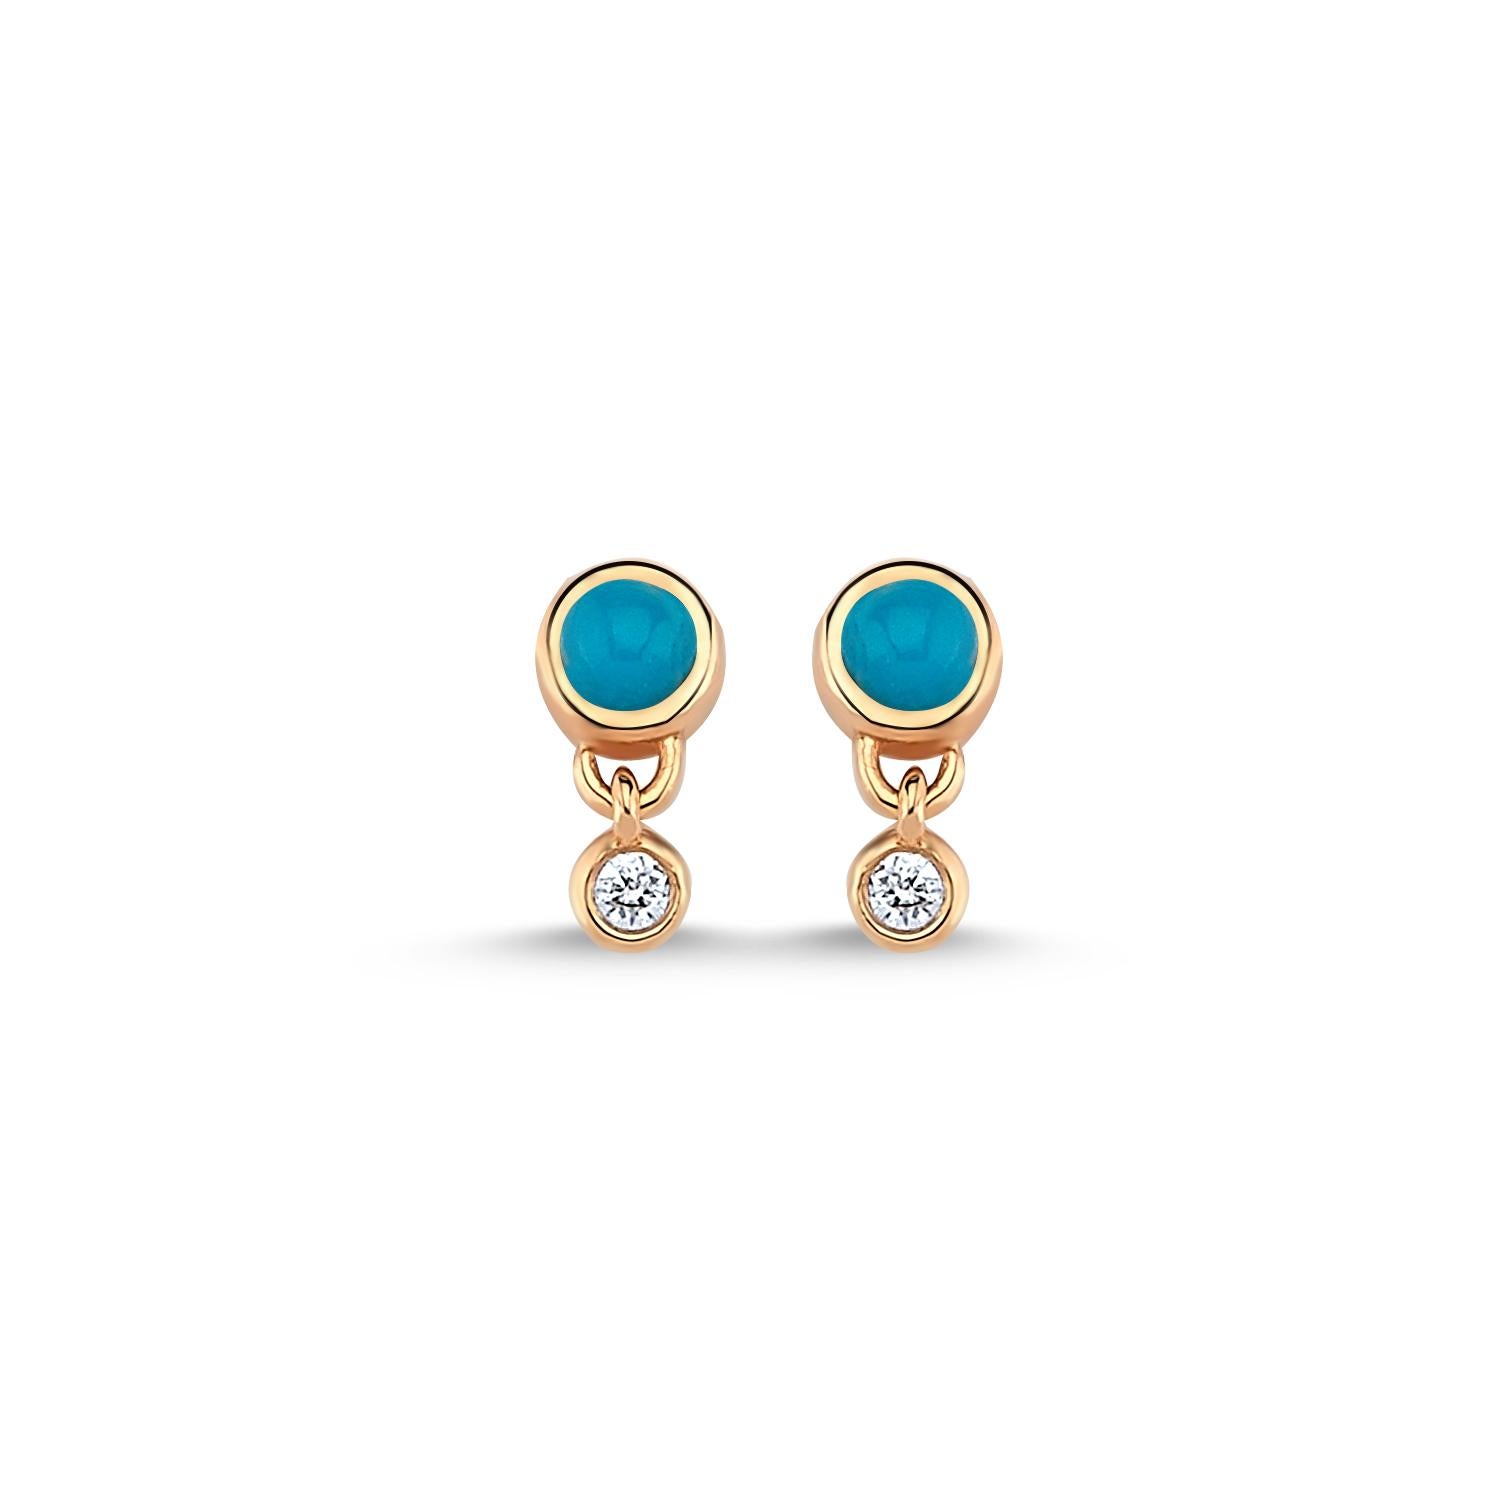 Rhea turquoise stud earring (single) in 14k rose gold by Selda Jewellery

Additional Information:-
Collection: Treasures of the Sea Collection
14k Rose gold
0.03ct White diamond
Height 1cm